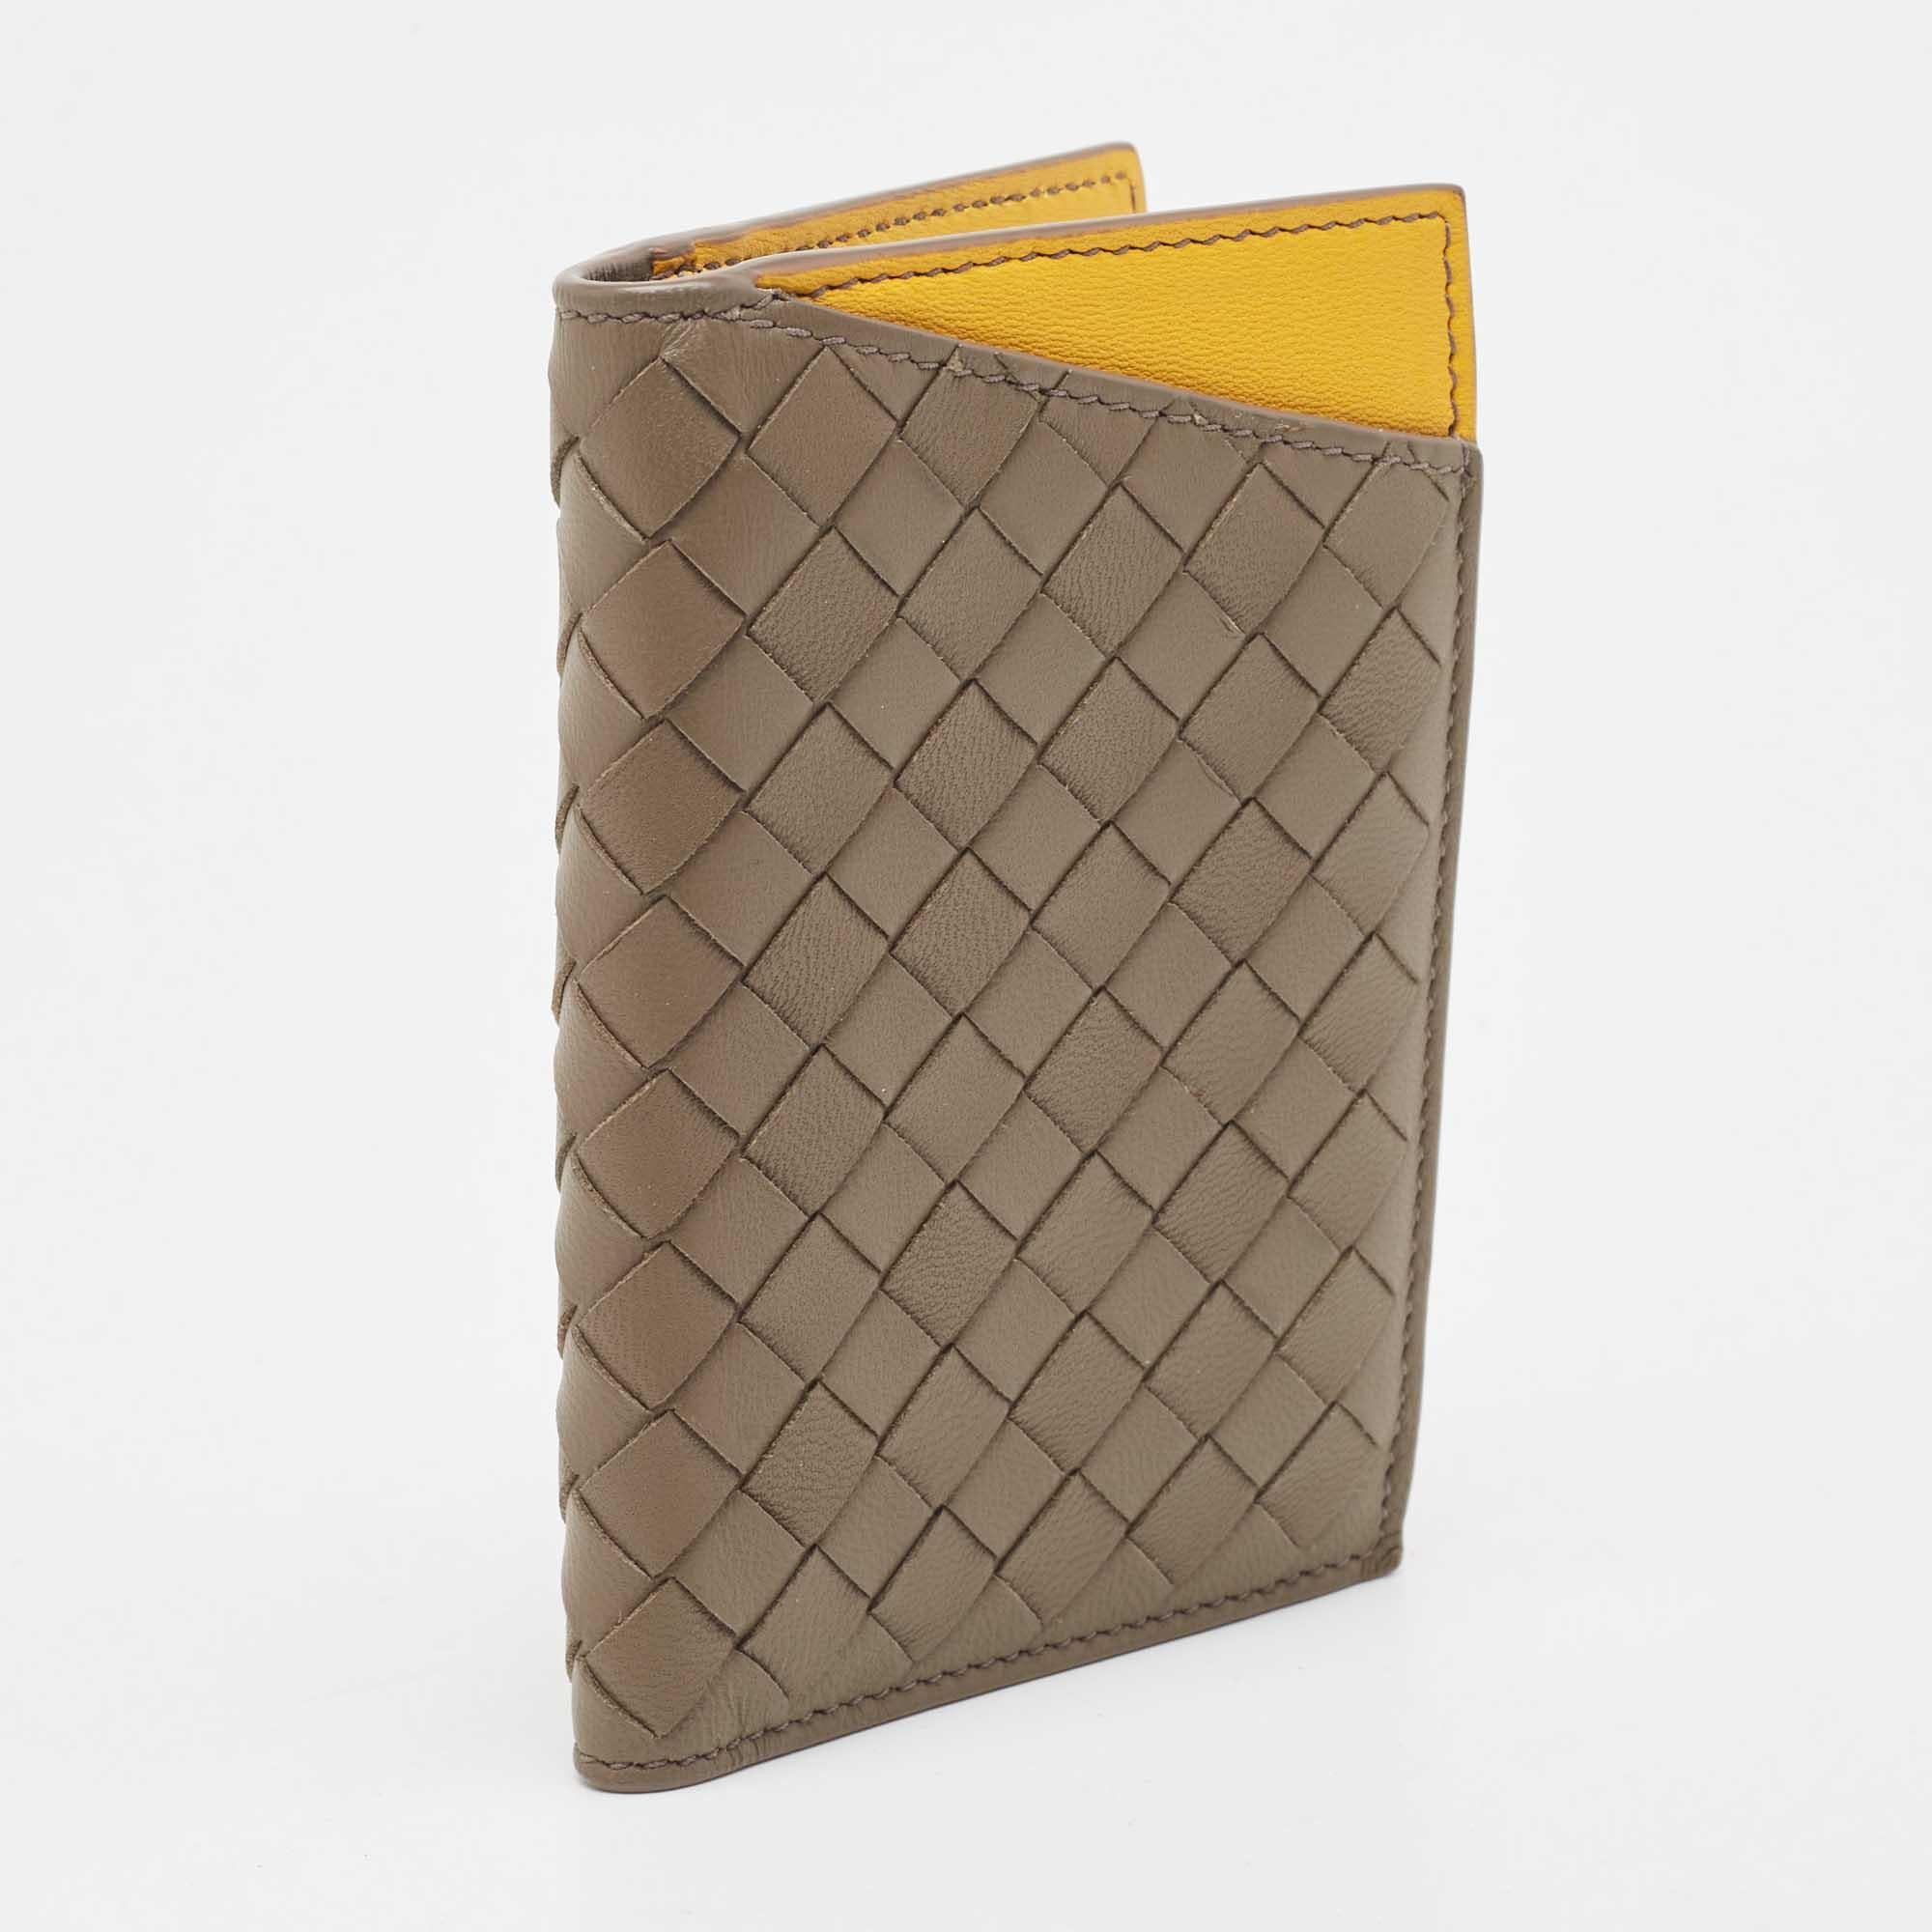 This Bottega Veneta card case is an immaculate balance of sophistication and rational utility. It has been designed using Intrecciato leather and elevated by a sleek finish. The creation is equipped with ample space for your monetary essentials.

